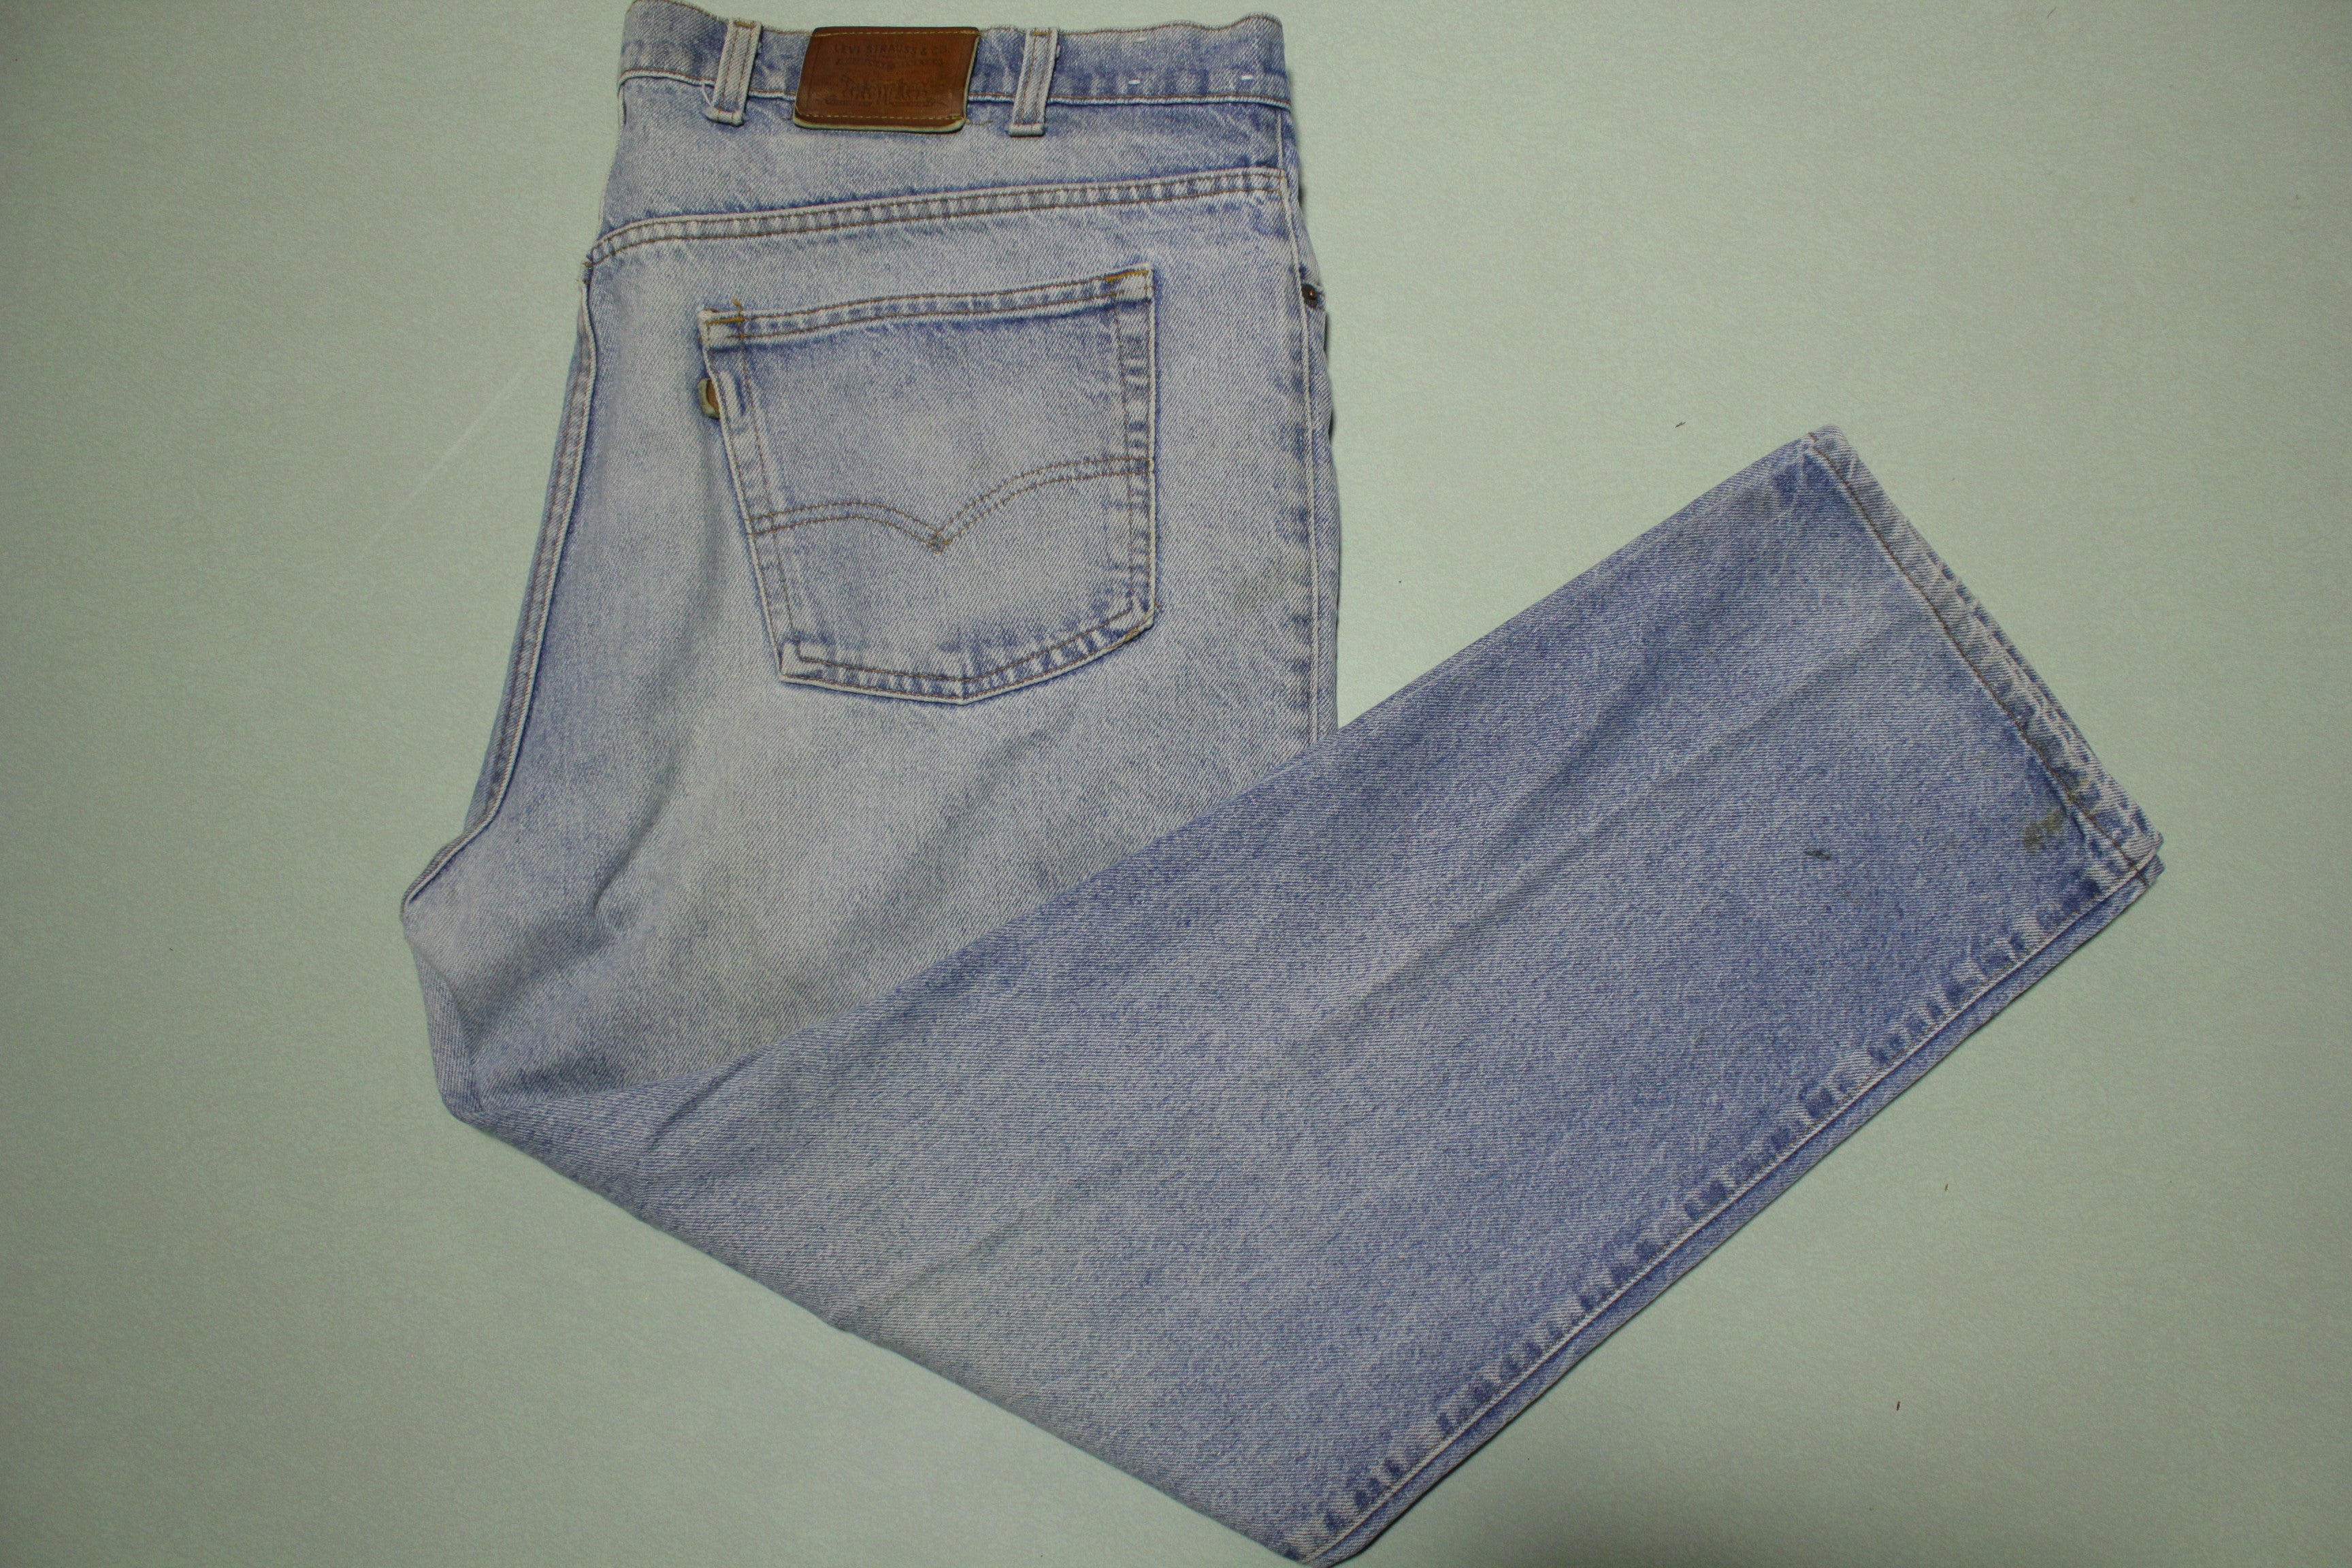 Levis Leather Tab Patch Stone Washed Made in USA Jeans Vintage